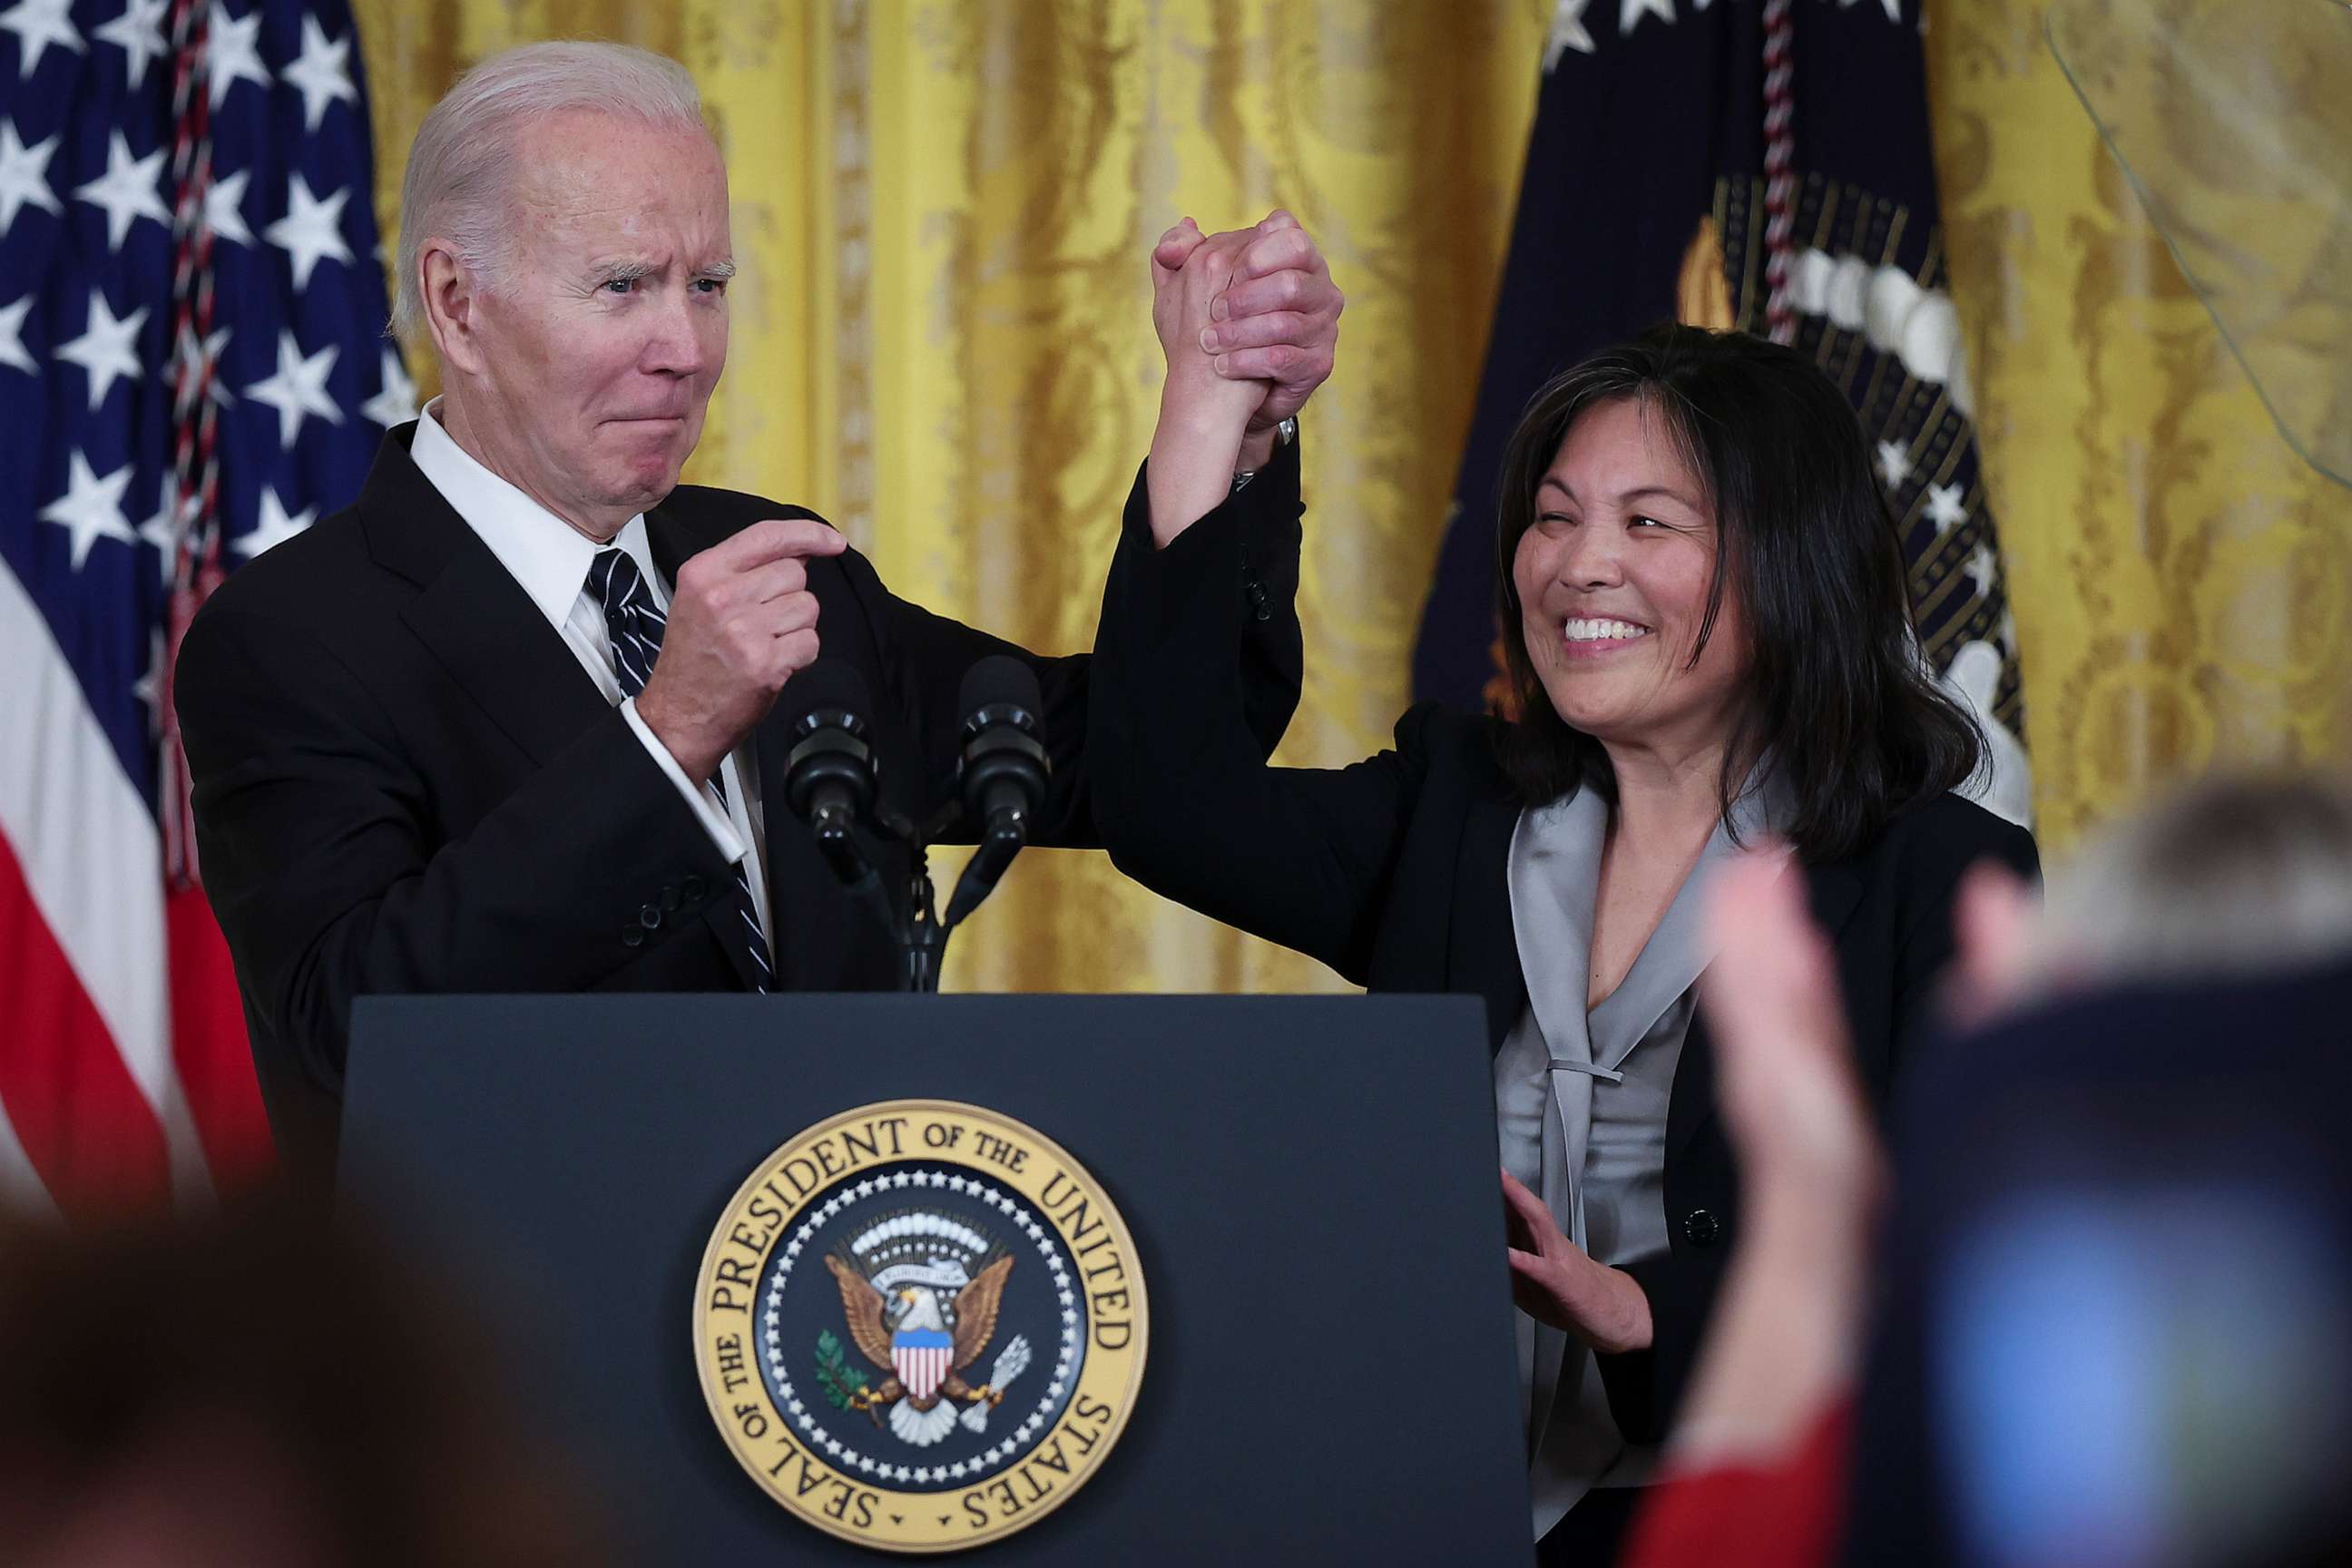 PHOTO: U.S. President Joe Biden links arms with Julie Su, his nominee to be the next Secretary of Labor during an event in the East Room of the White House, March 1, 2023, in Washington.